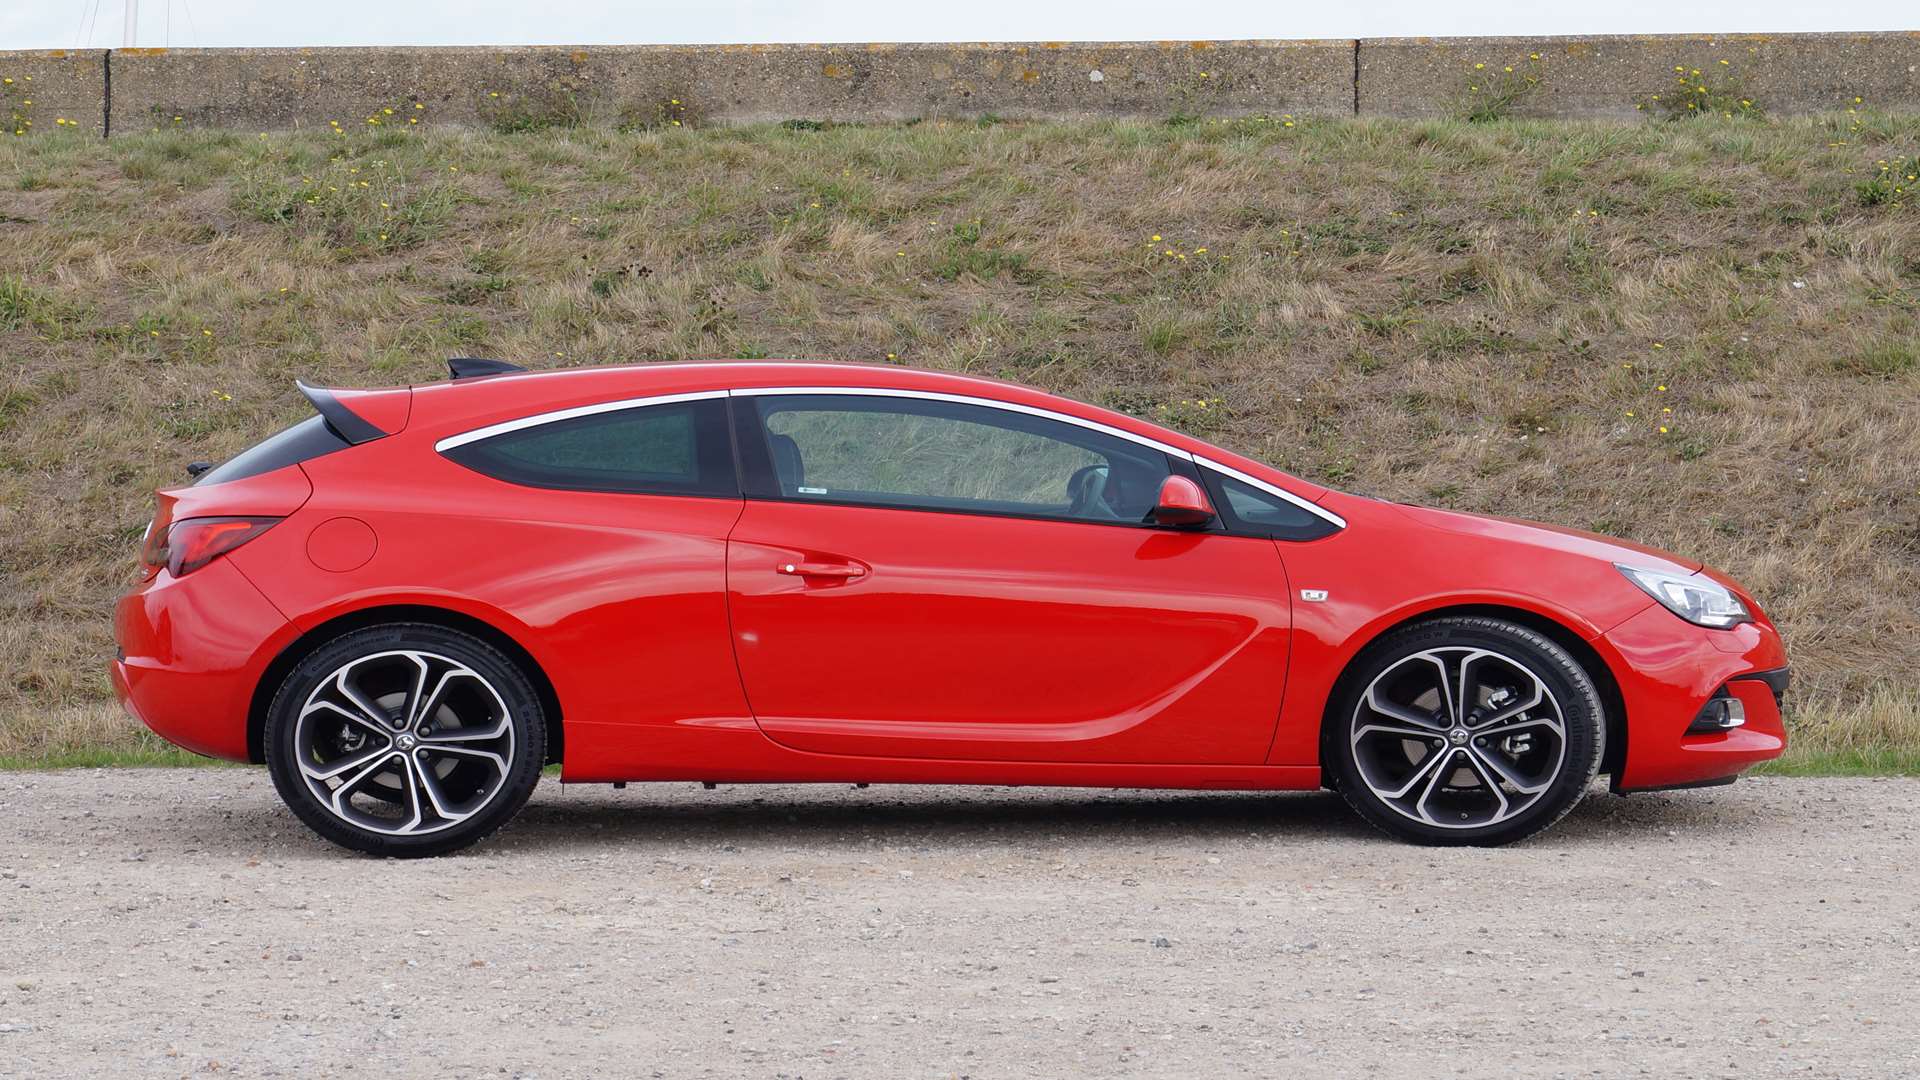 The GTC has a squat, purposeful stance, particularly on the optional 20-inch wheels